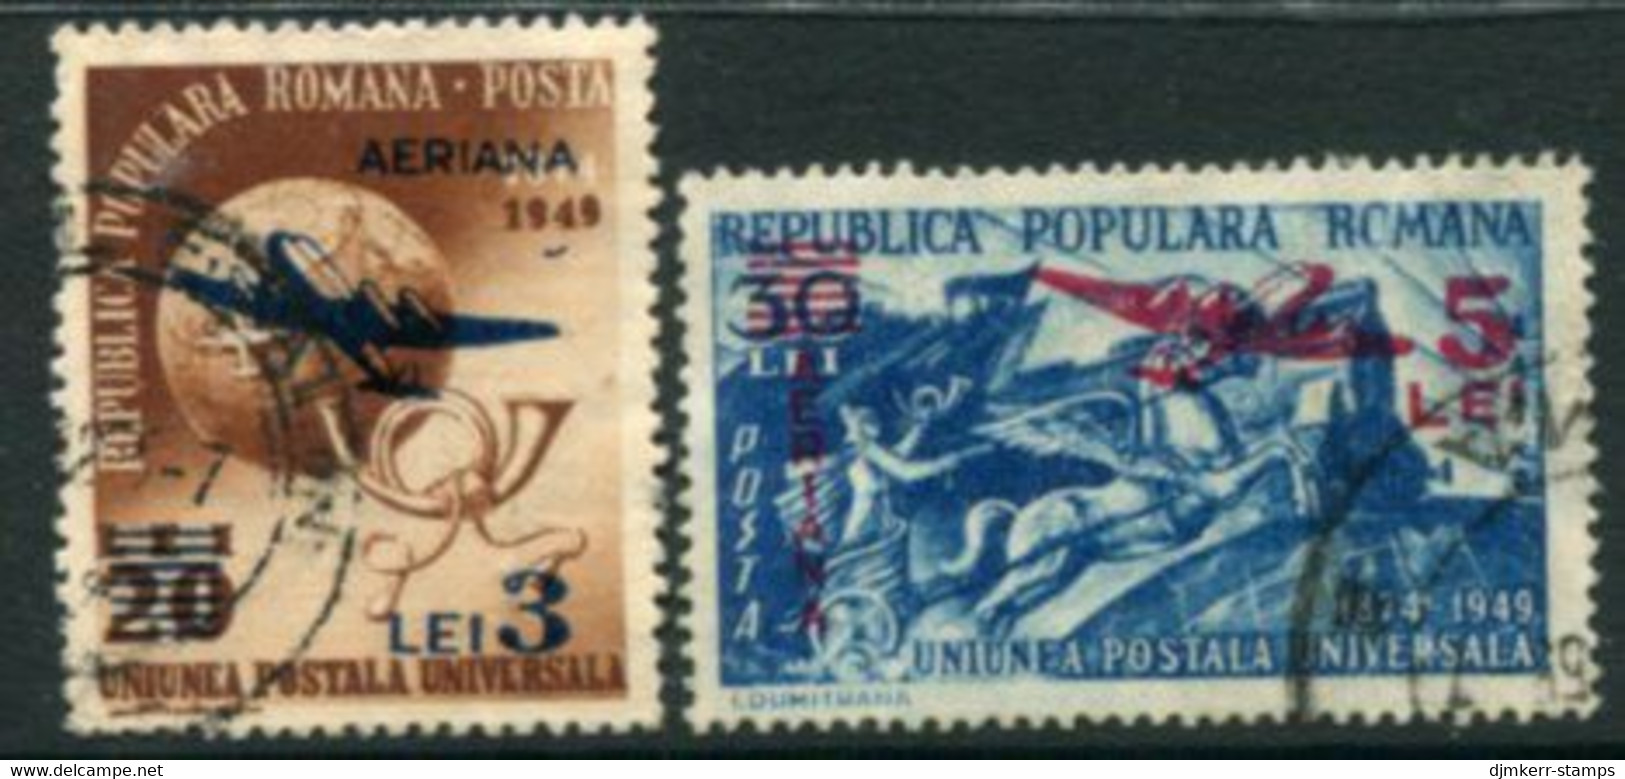 ROMANIA 1952 Currency Reform Surcharge On UPU. Airmail Used.  Michel 1365-66 - Usati